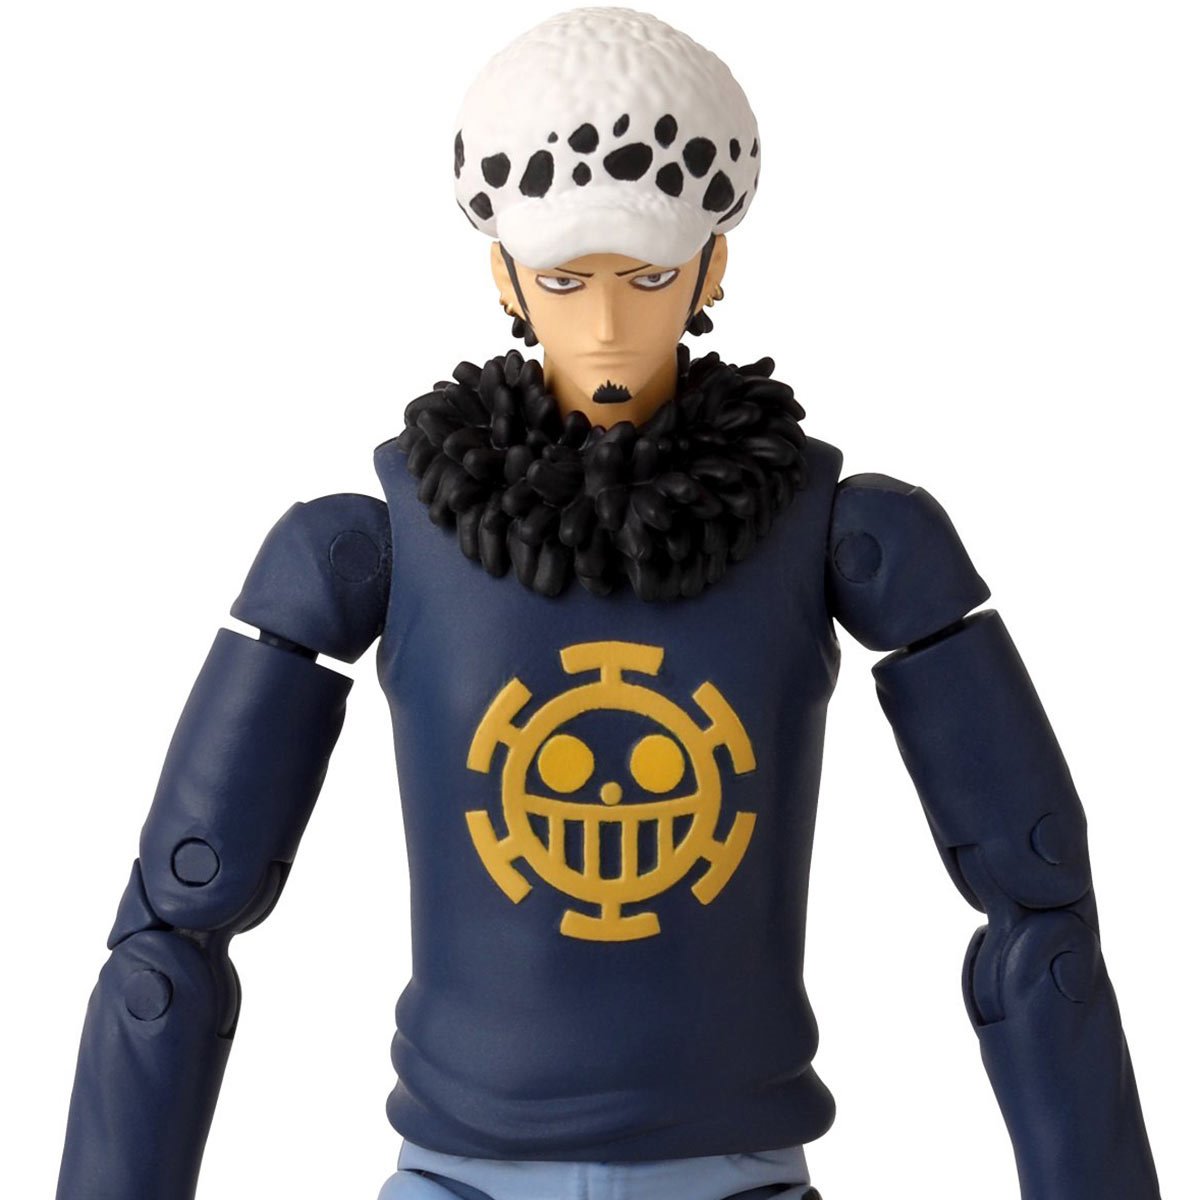 One Piece Anime Heroes Brook Action Figure, Not Mint